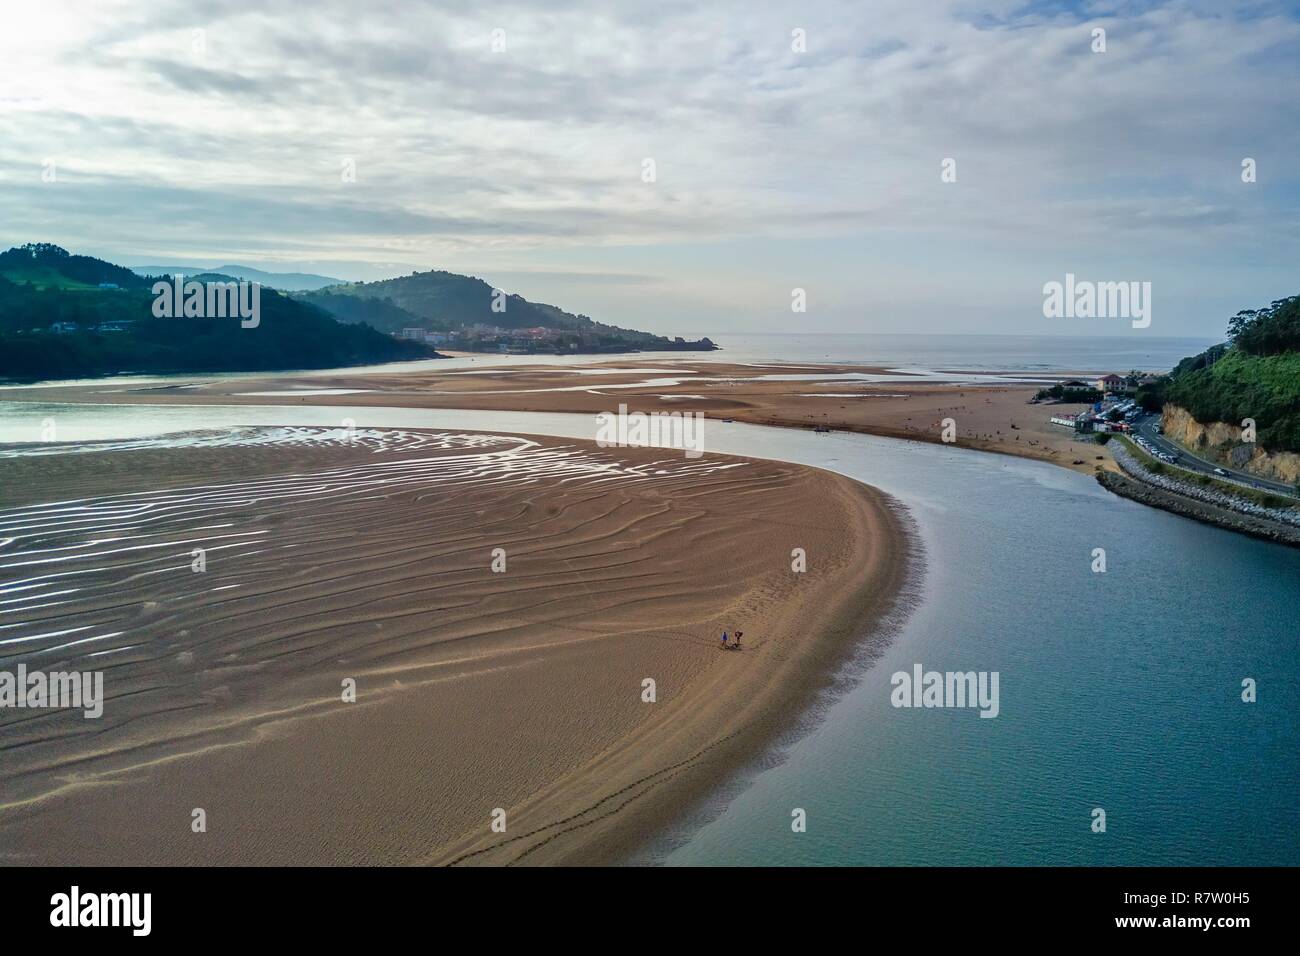 Spain, Basque Country, Biscay Province, Gernika-Lumo region, Urdaibai estuary Biosphere Reserve, estuary of the Oka River at low tide in front of Mundaka, the beach of Laida (aerial view) Stock Photo